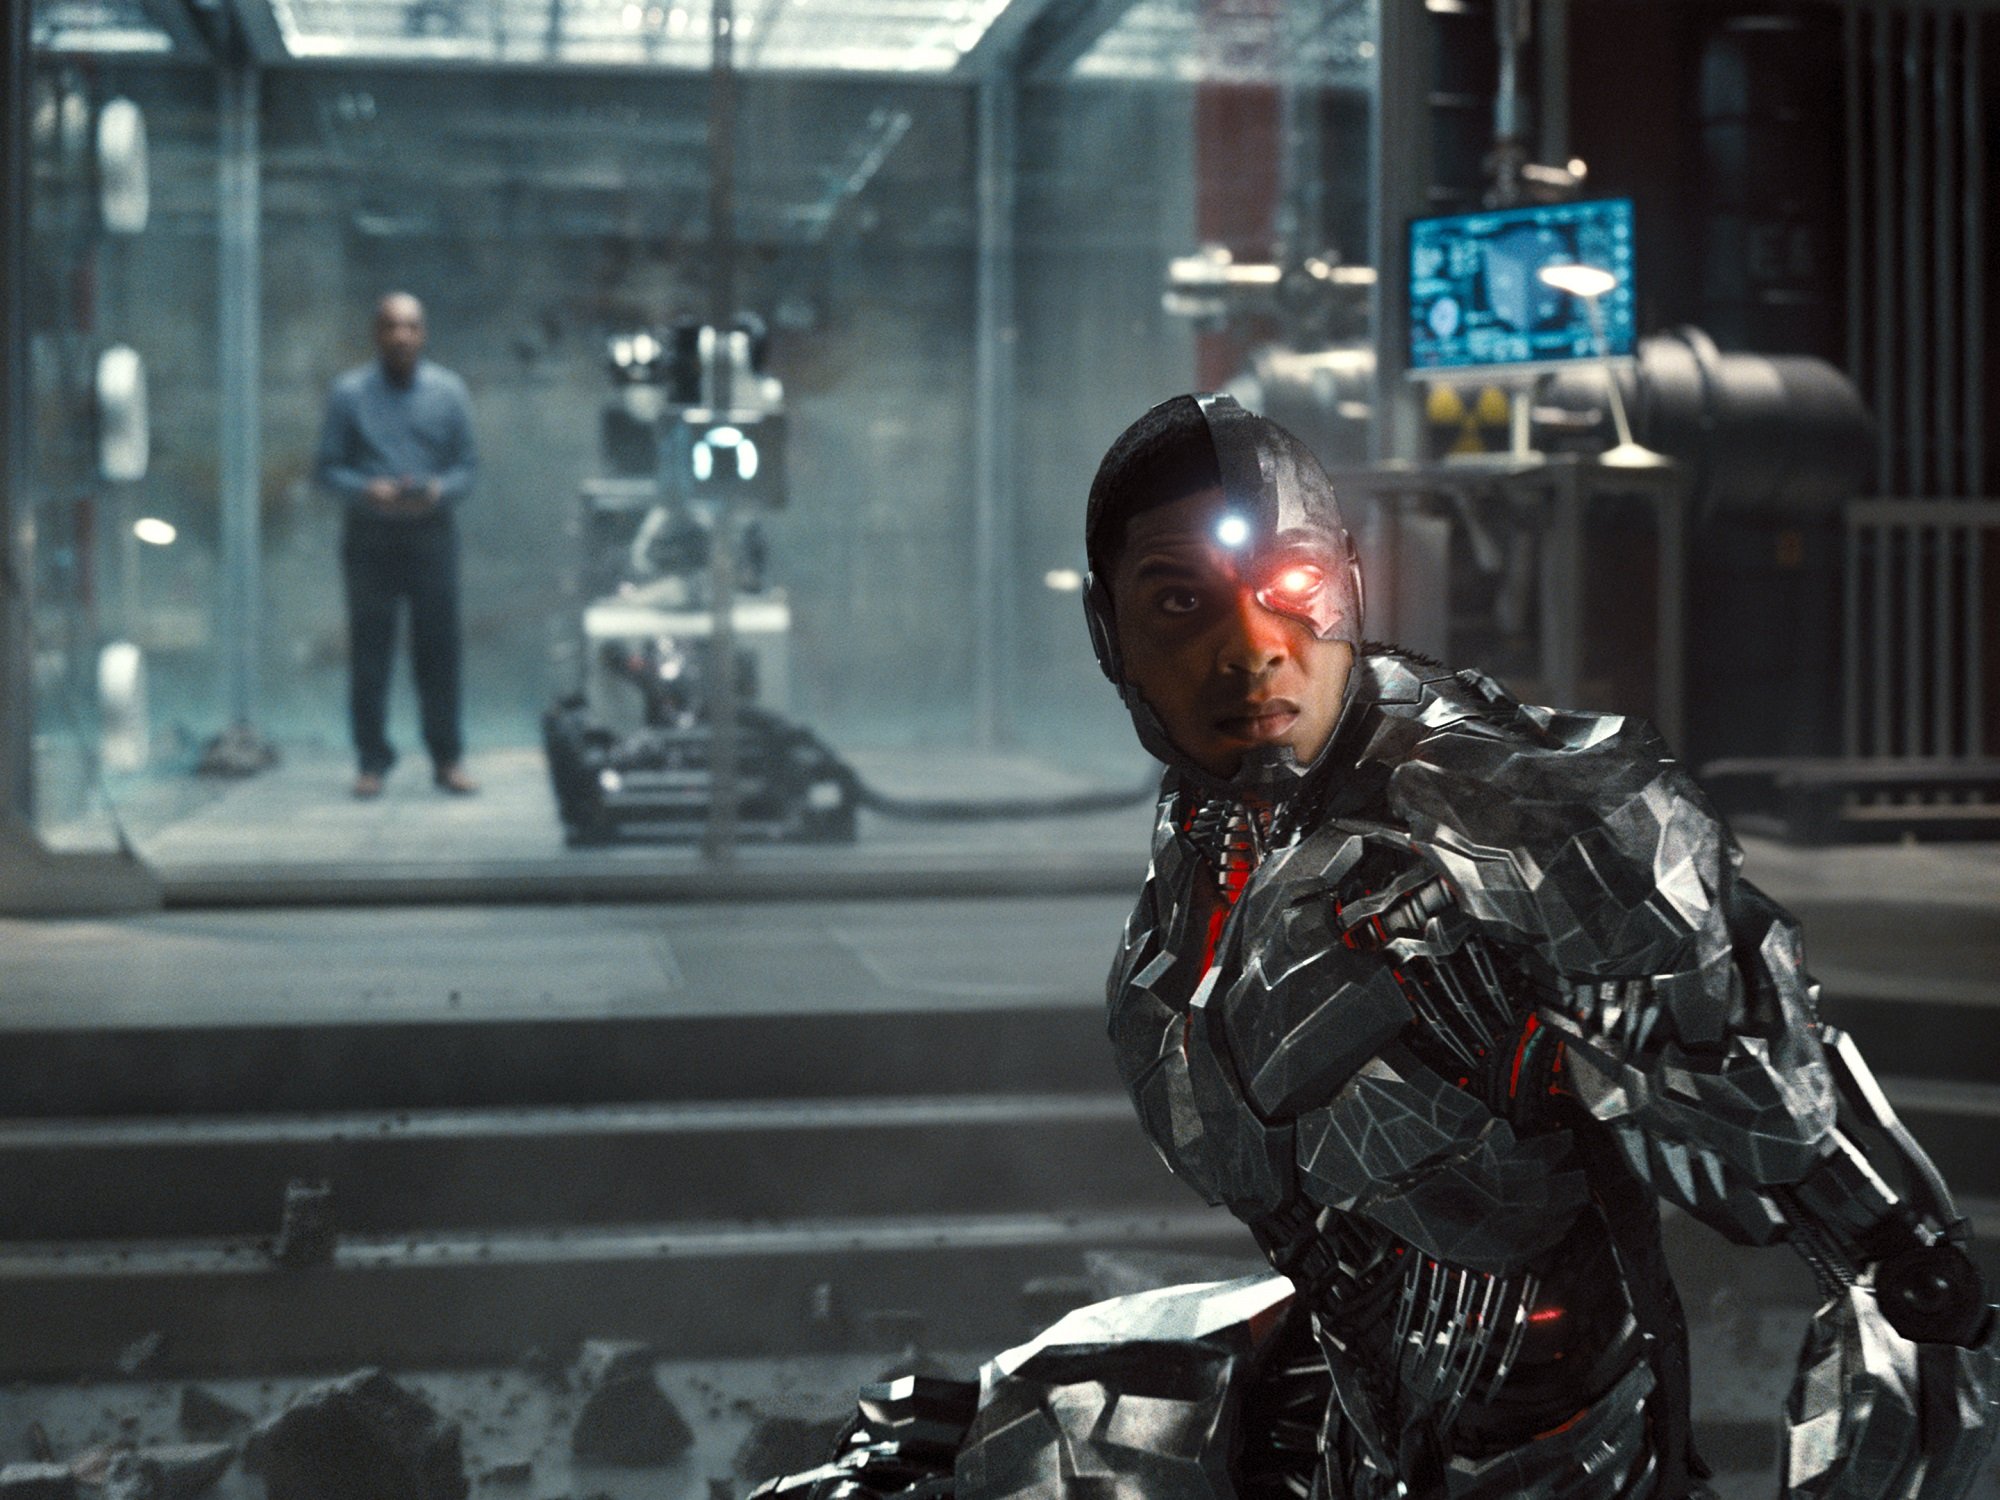 Zack Snyder's Justice League Cyborg in STAR Labs